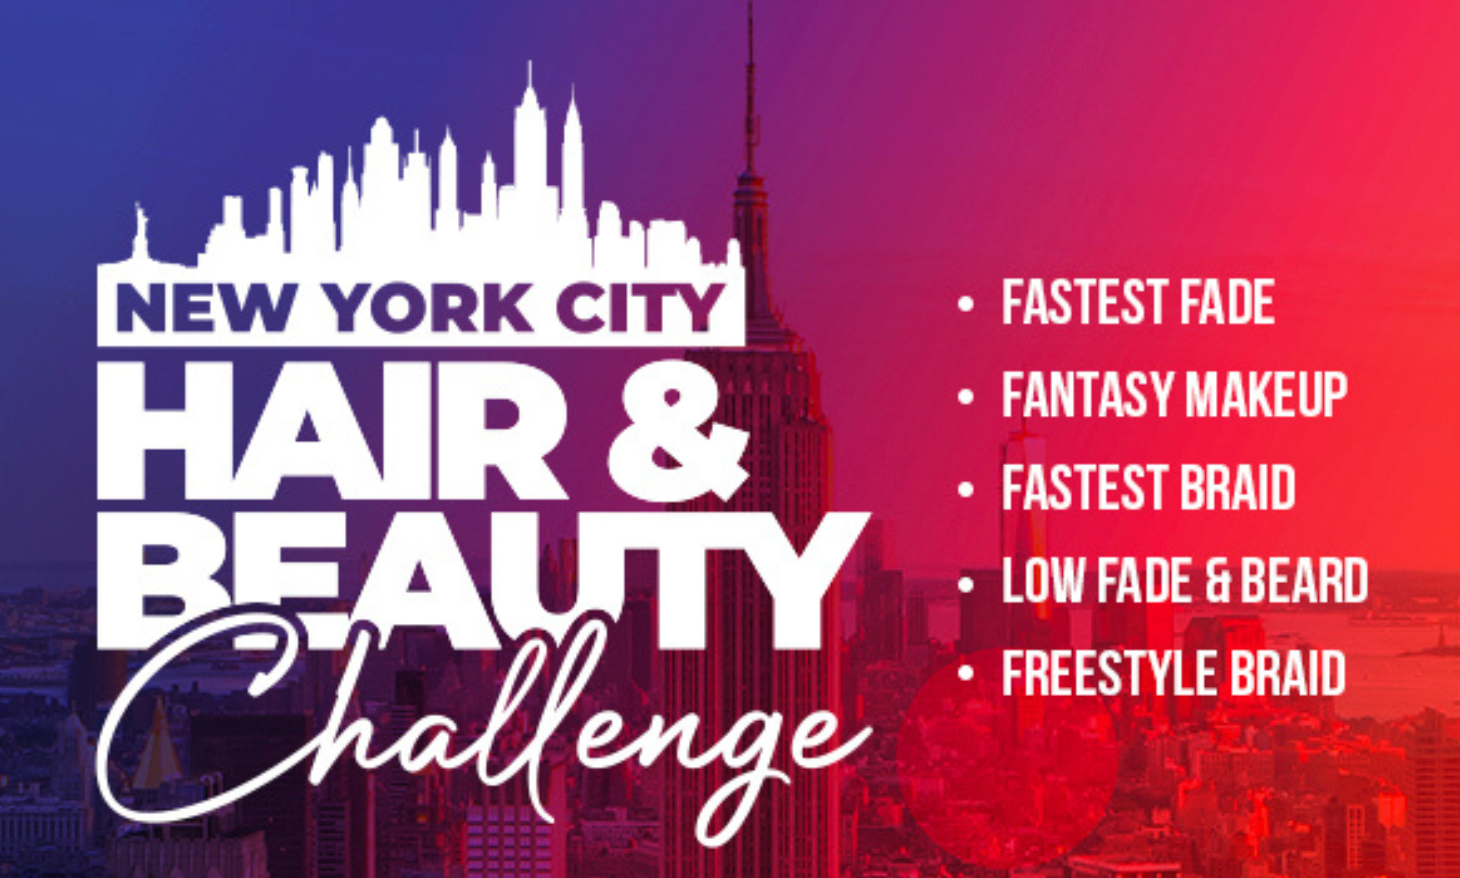 Glamour Nyc Hair Beauty Challenge